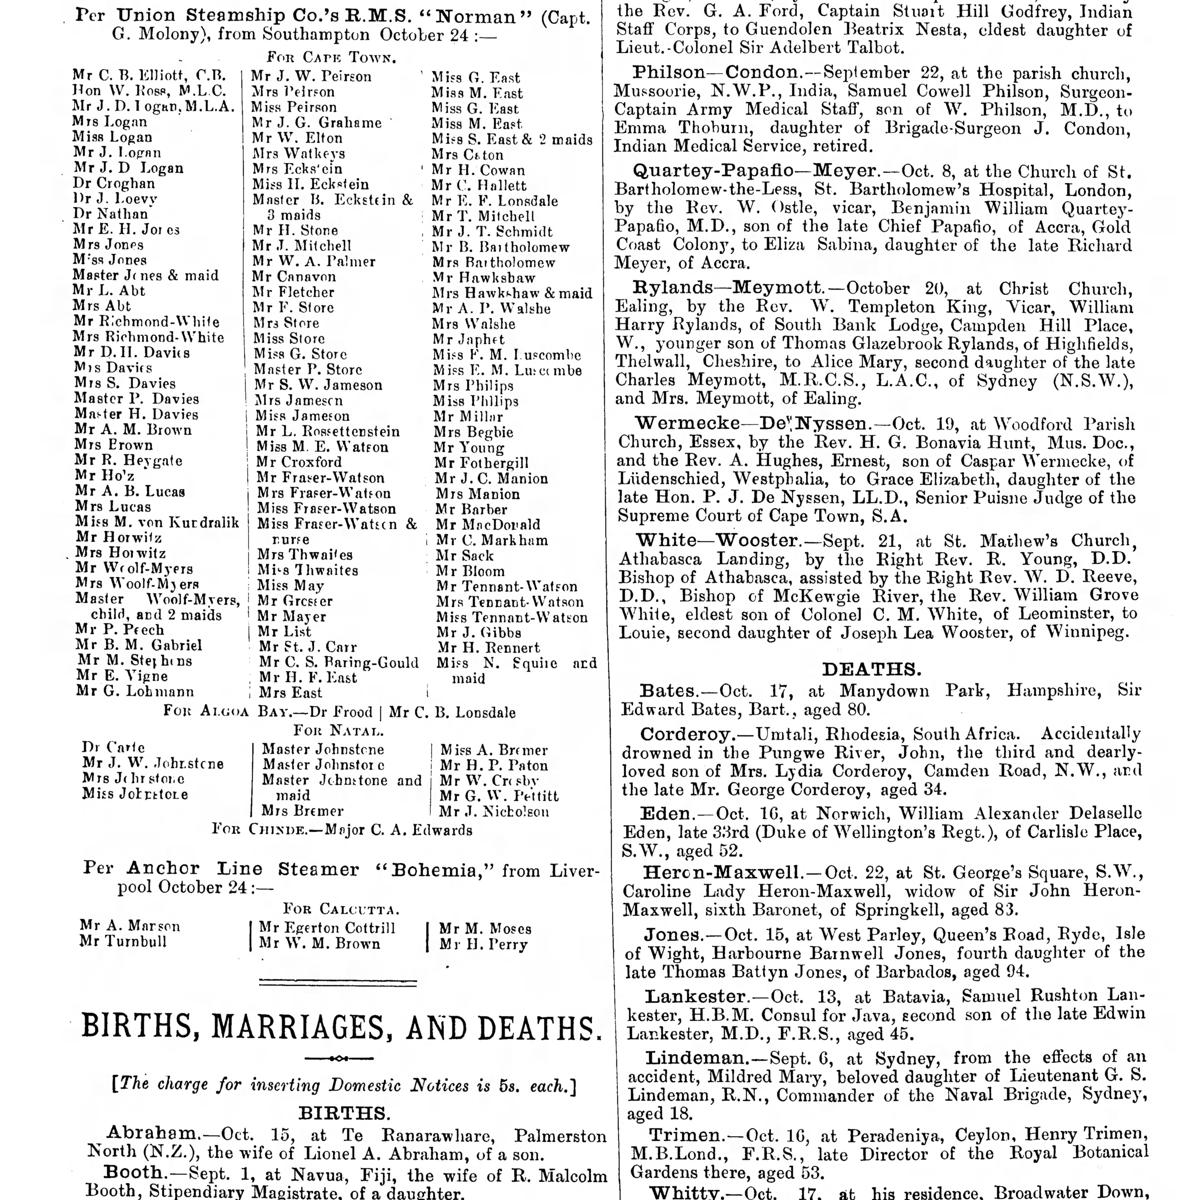 The Colonies and India, 1896-10-24, page 30